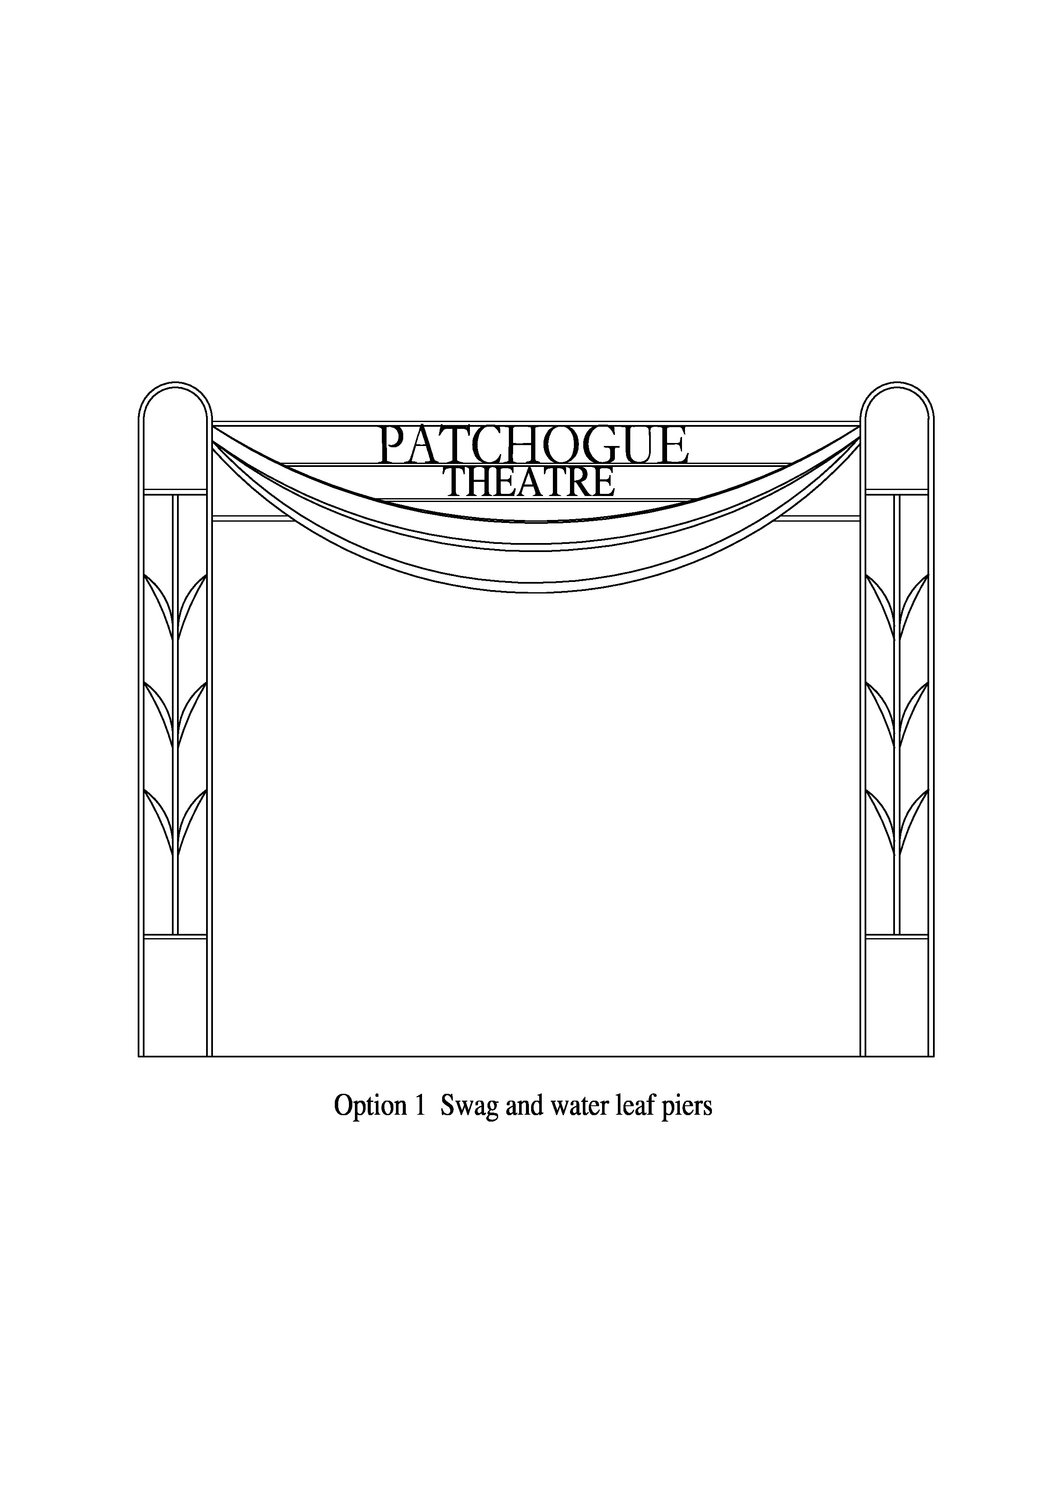 If awarded grant funding, the Patchogue Theatre archway will be installed sometime in 2024.